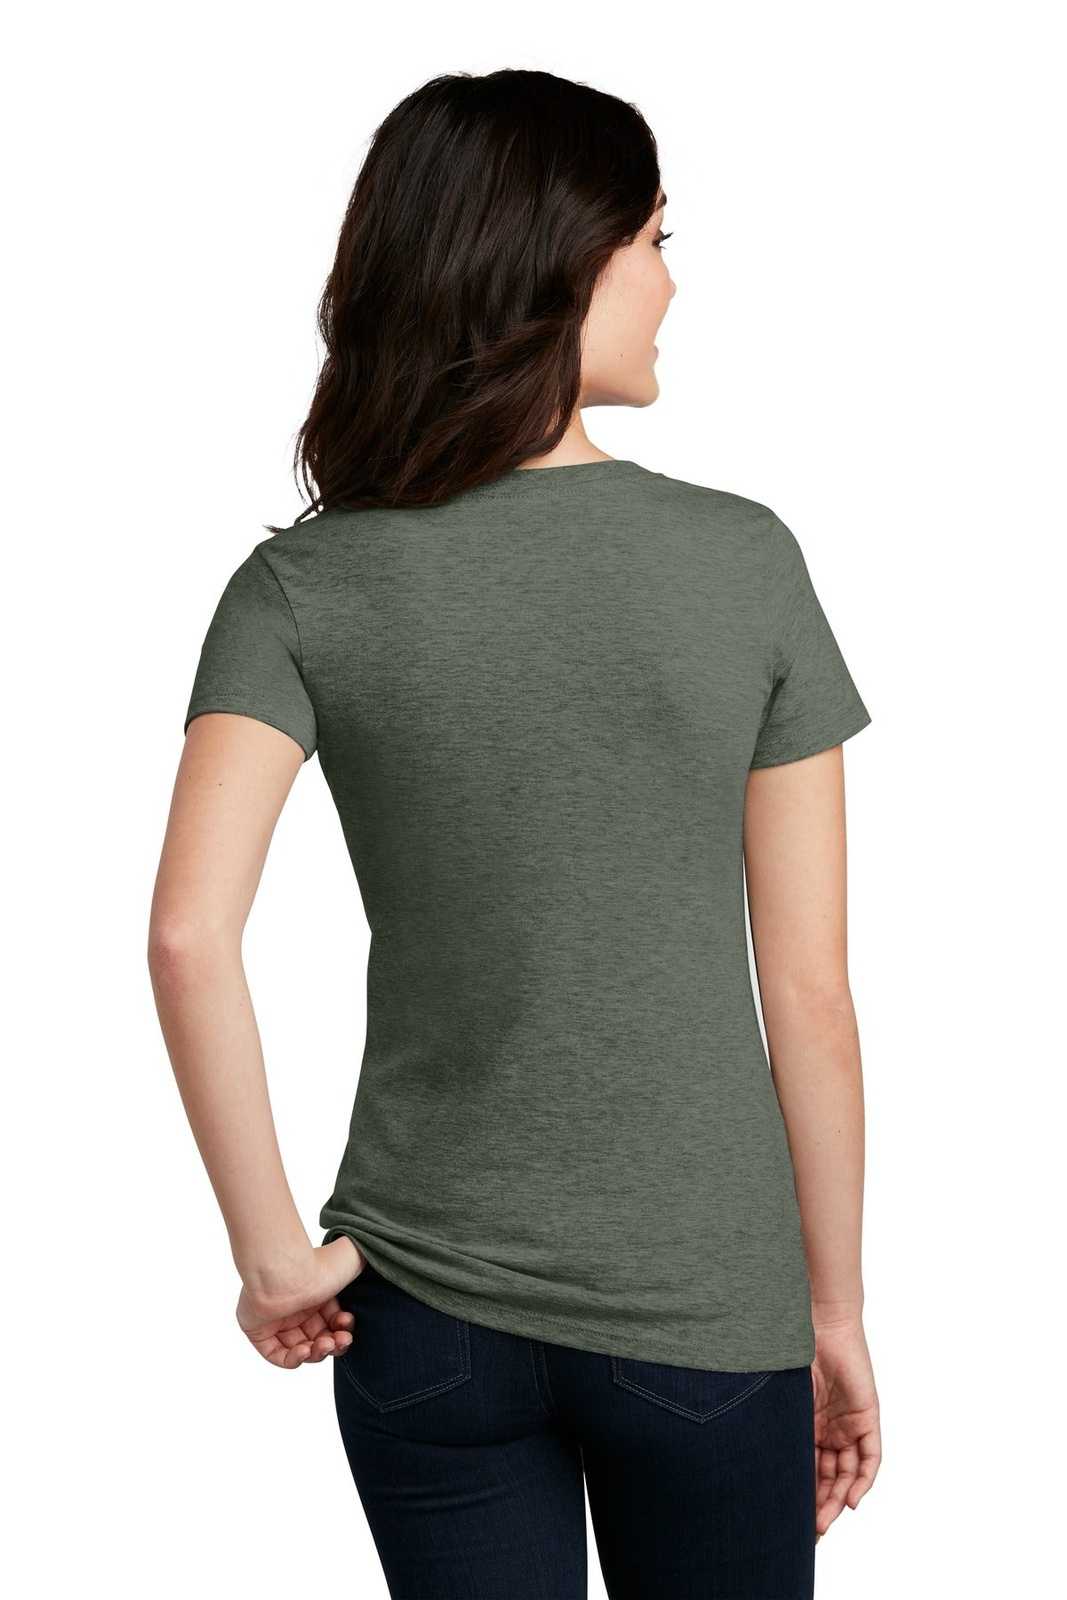 District DM1190L Women's Perfect Blend V-Neck Tee - Heathered Olive - HIT a Double - 1